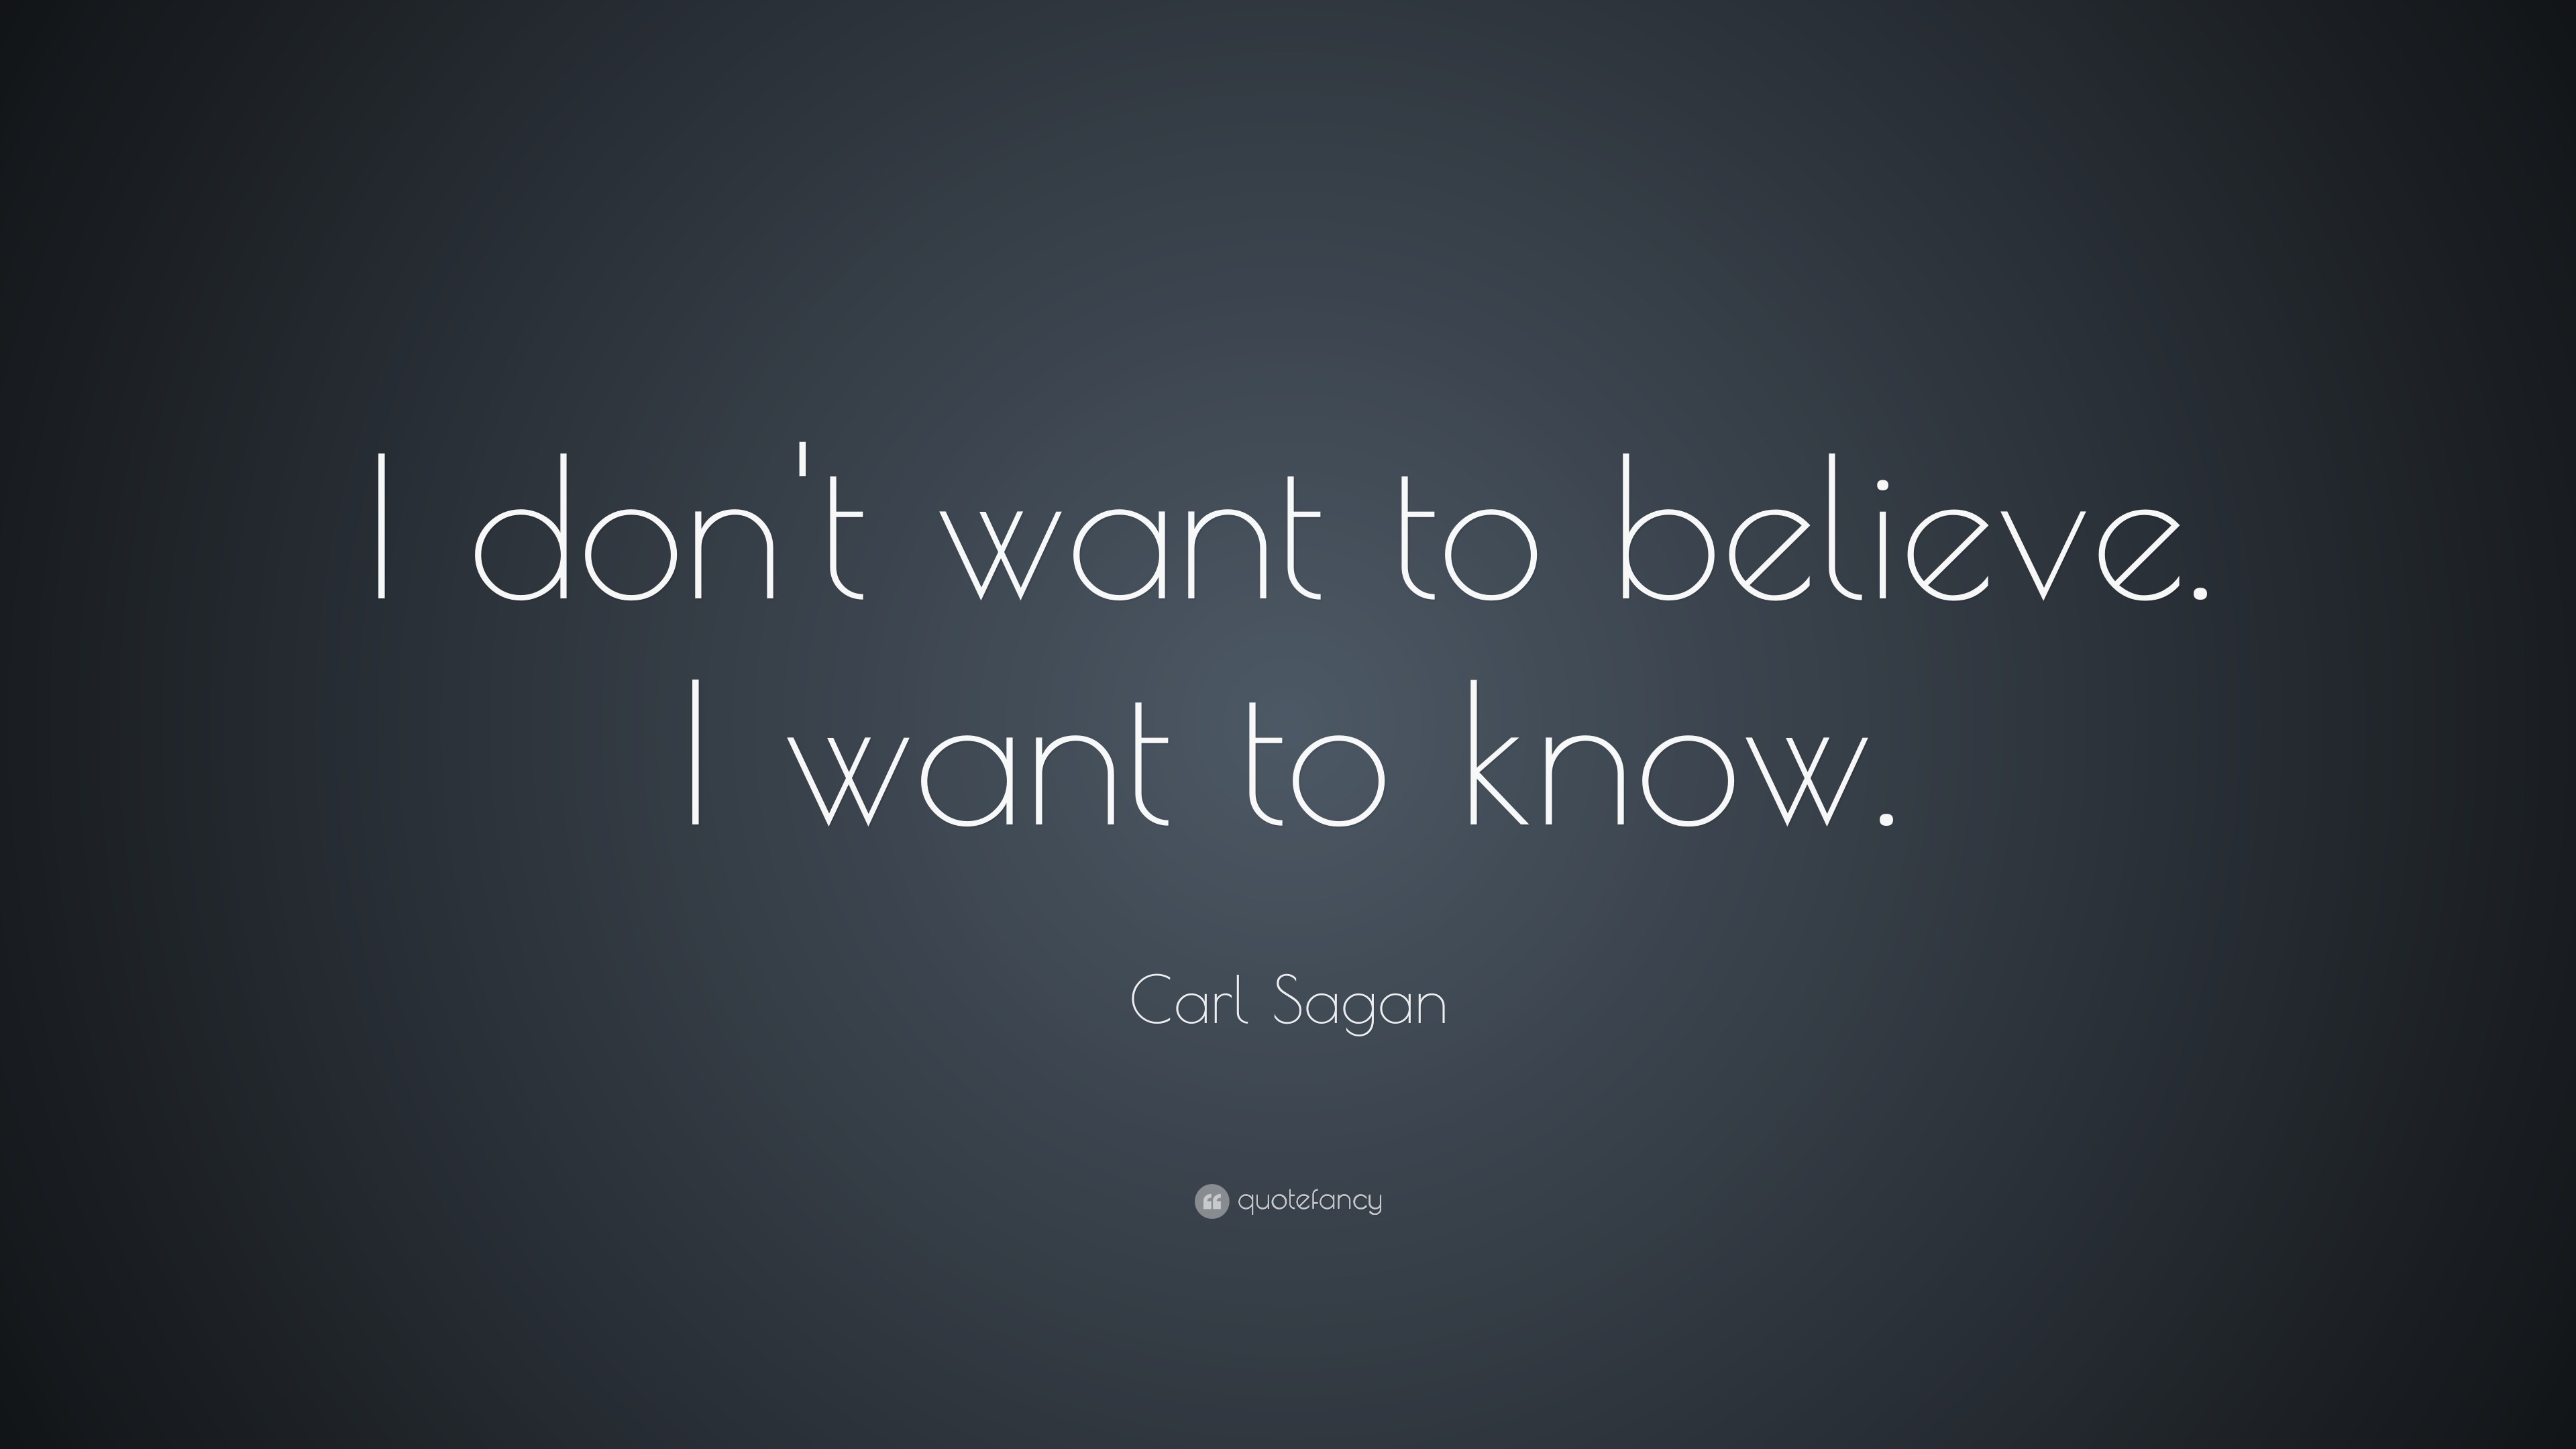 3840x2160 Carl Sagan Quote: “I don't want to believe. I want to